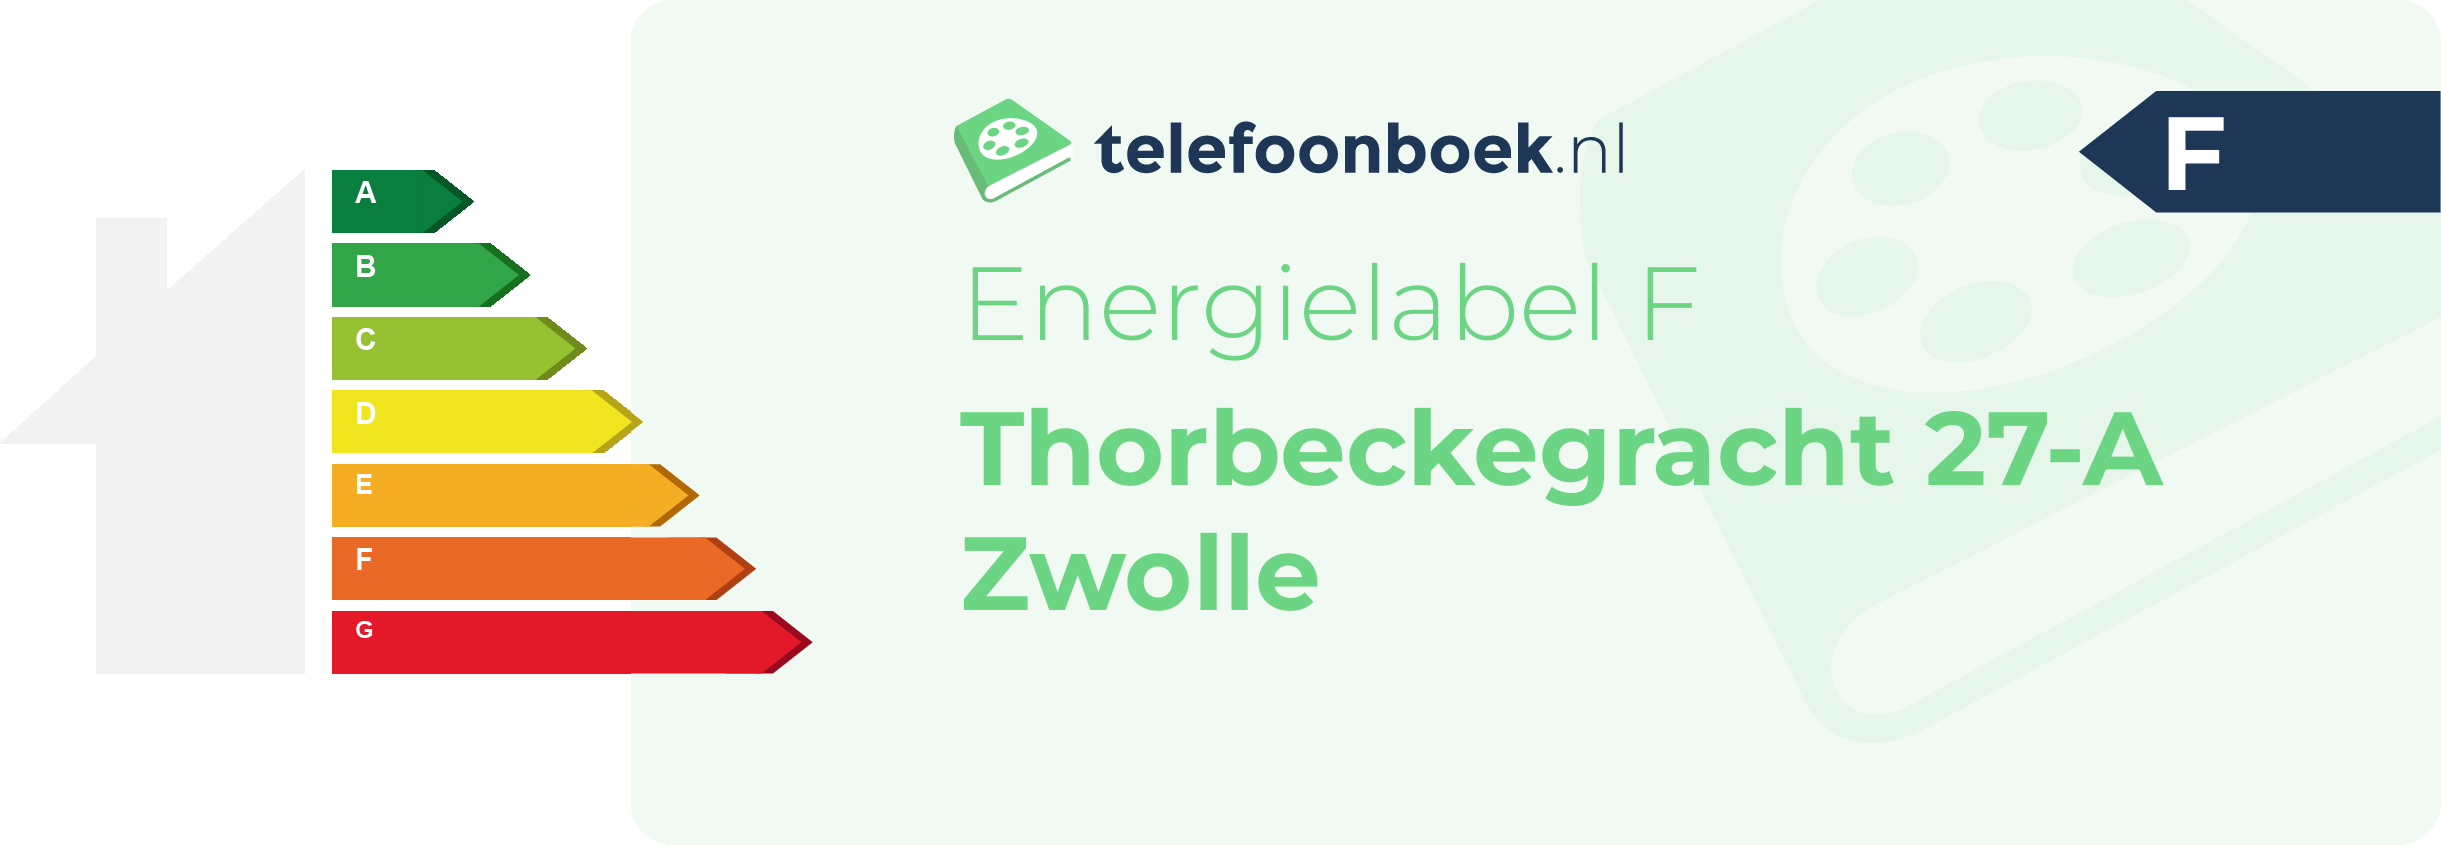 Energielabel Thorbeckegracht 27-A Zwolle